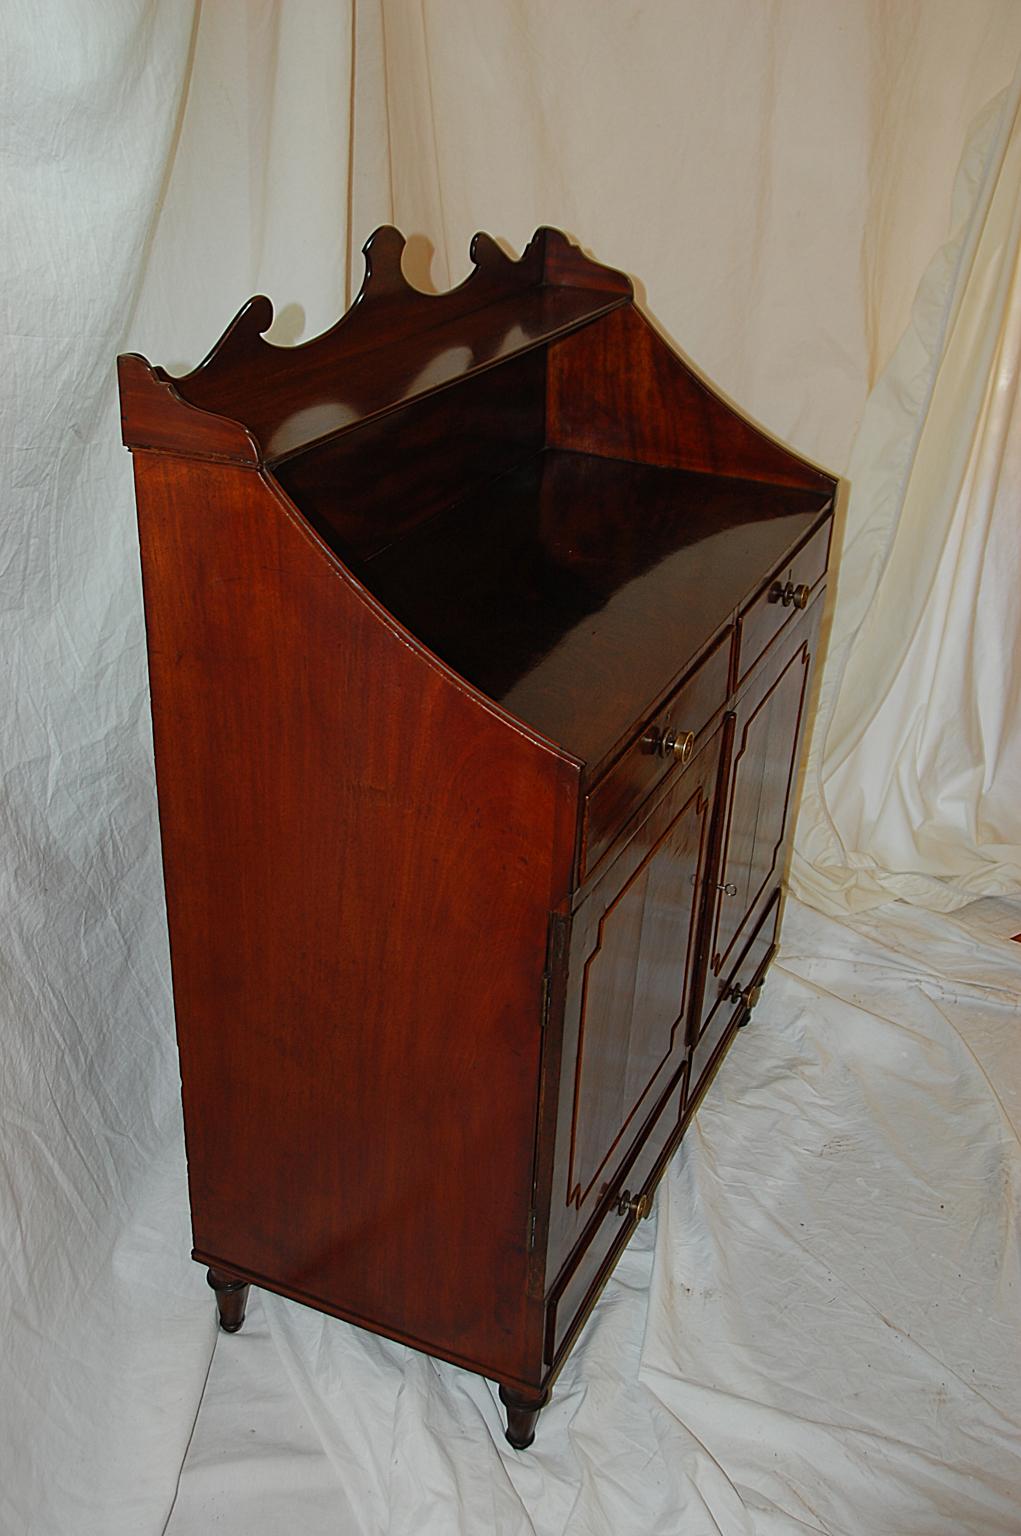 
 English Regency period flame grain mahogany four drawer chiffonier with two doors, top shelf and mahogany crossbanding. This handsome period cabinet can be used in many different capacities. Most commonly it is used as a dry bar with room for